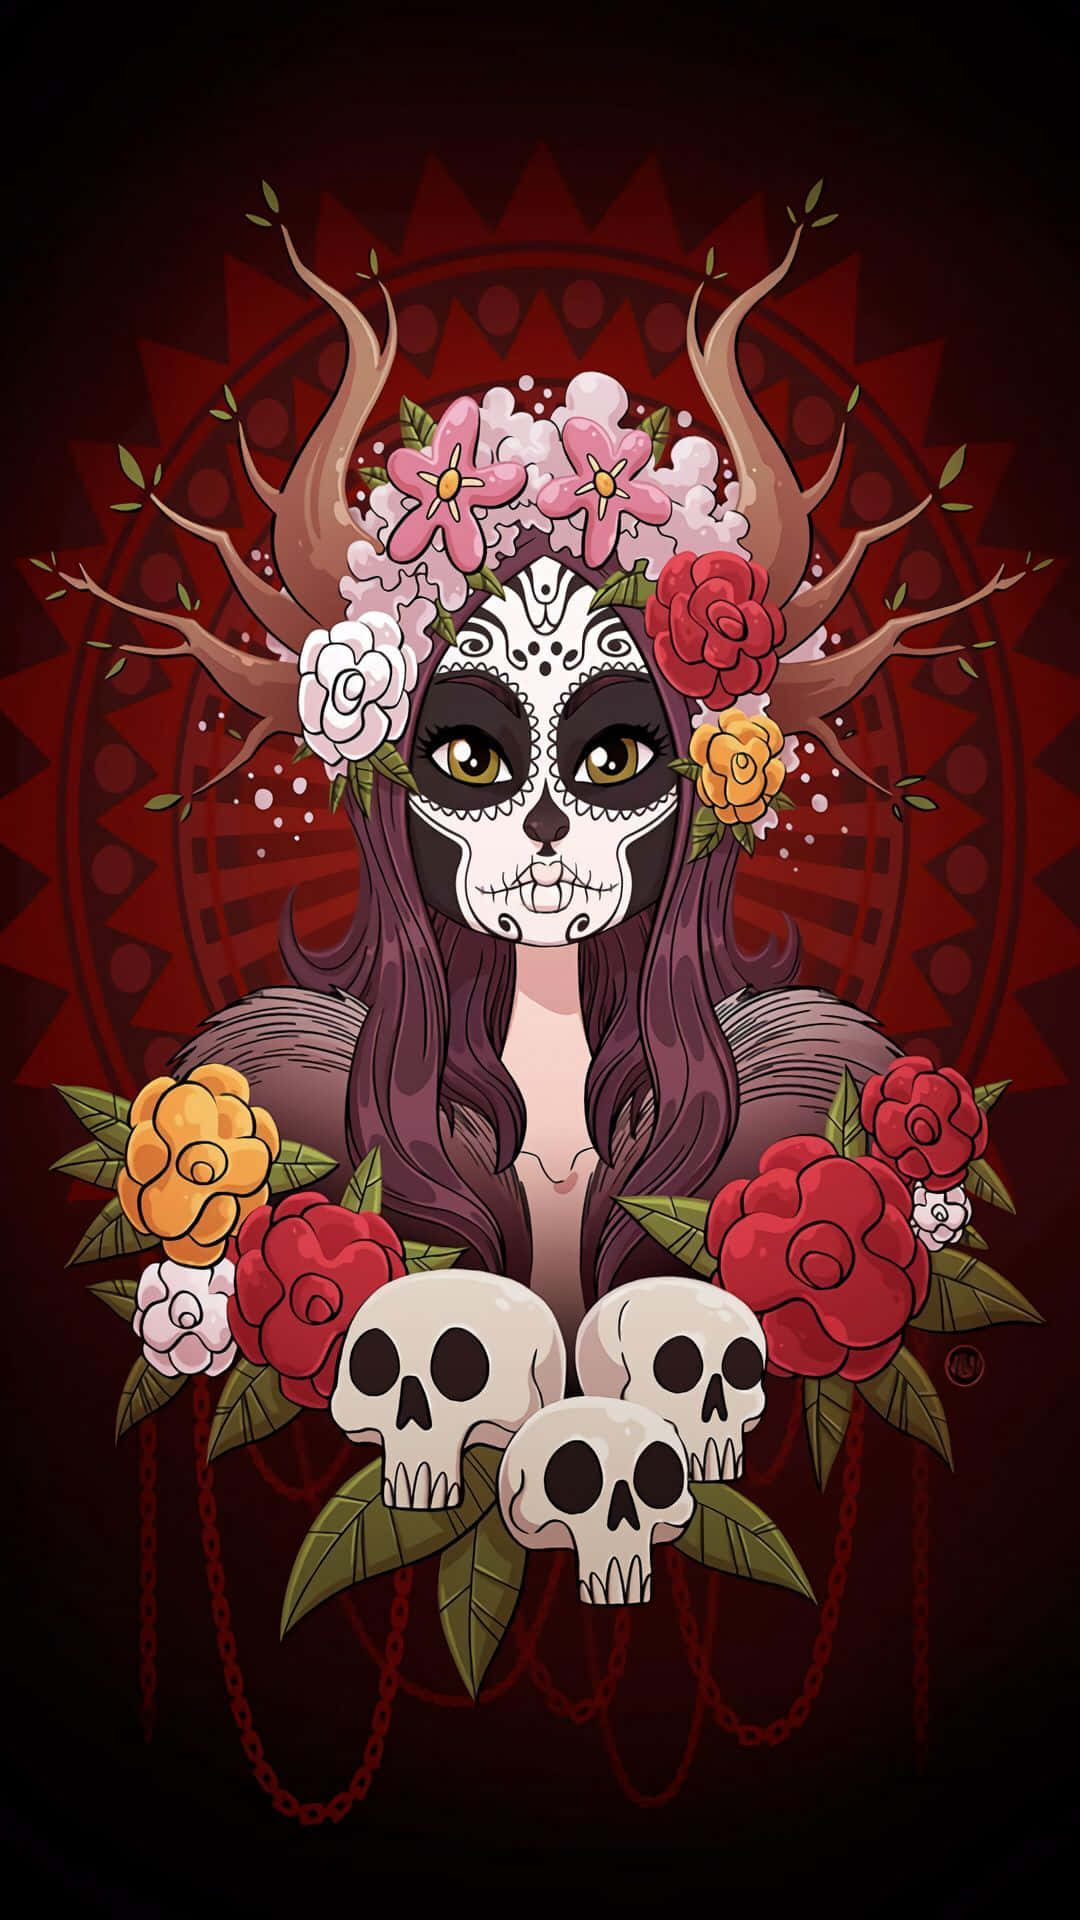 A Woman With Skulls And Flowers On Her Head